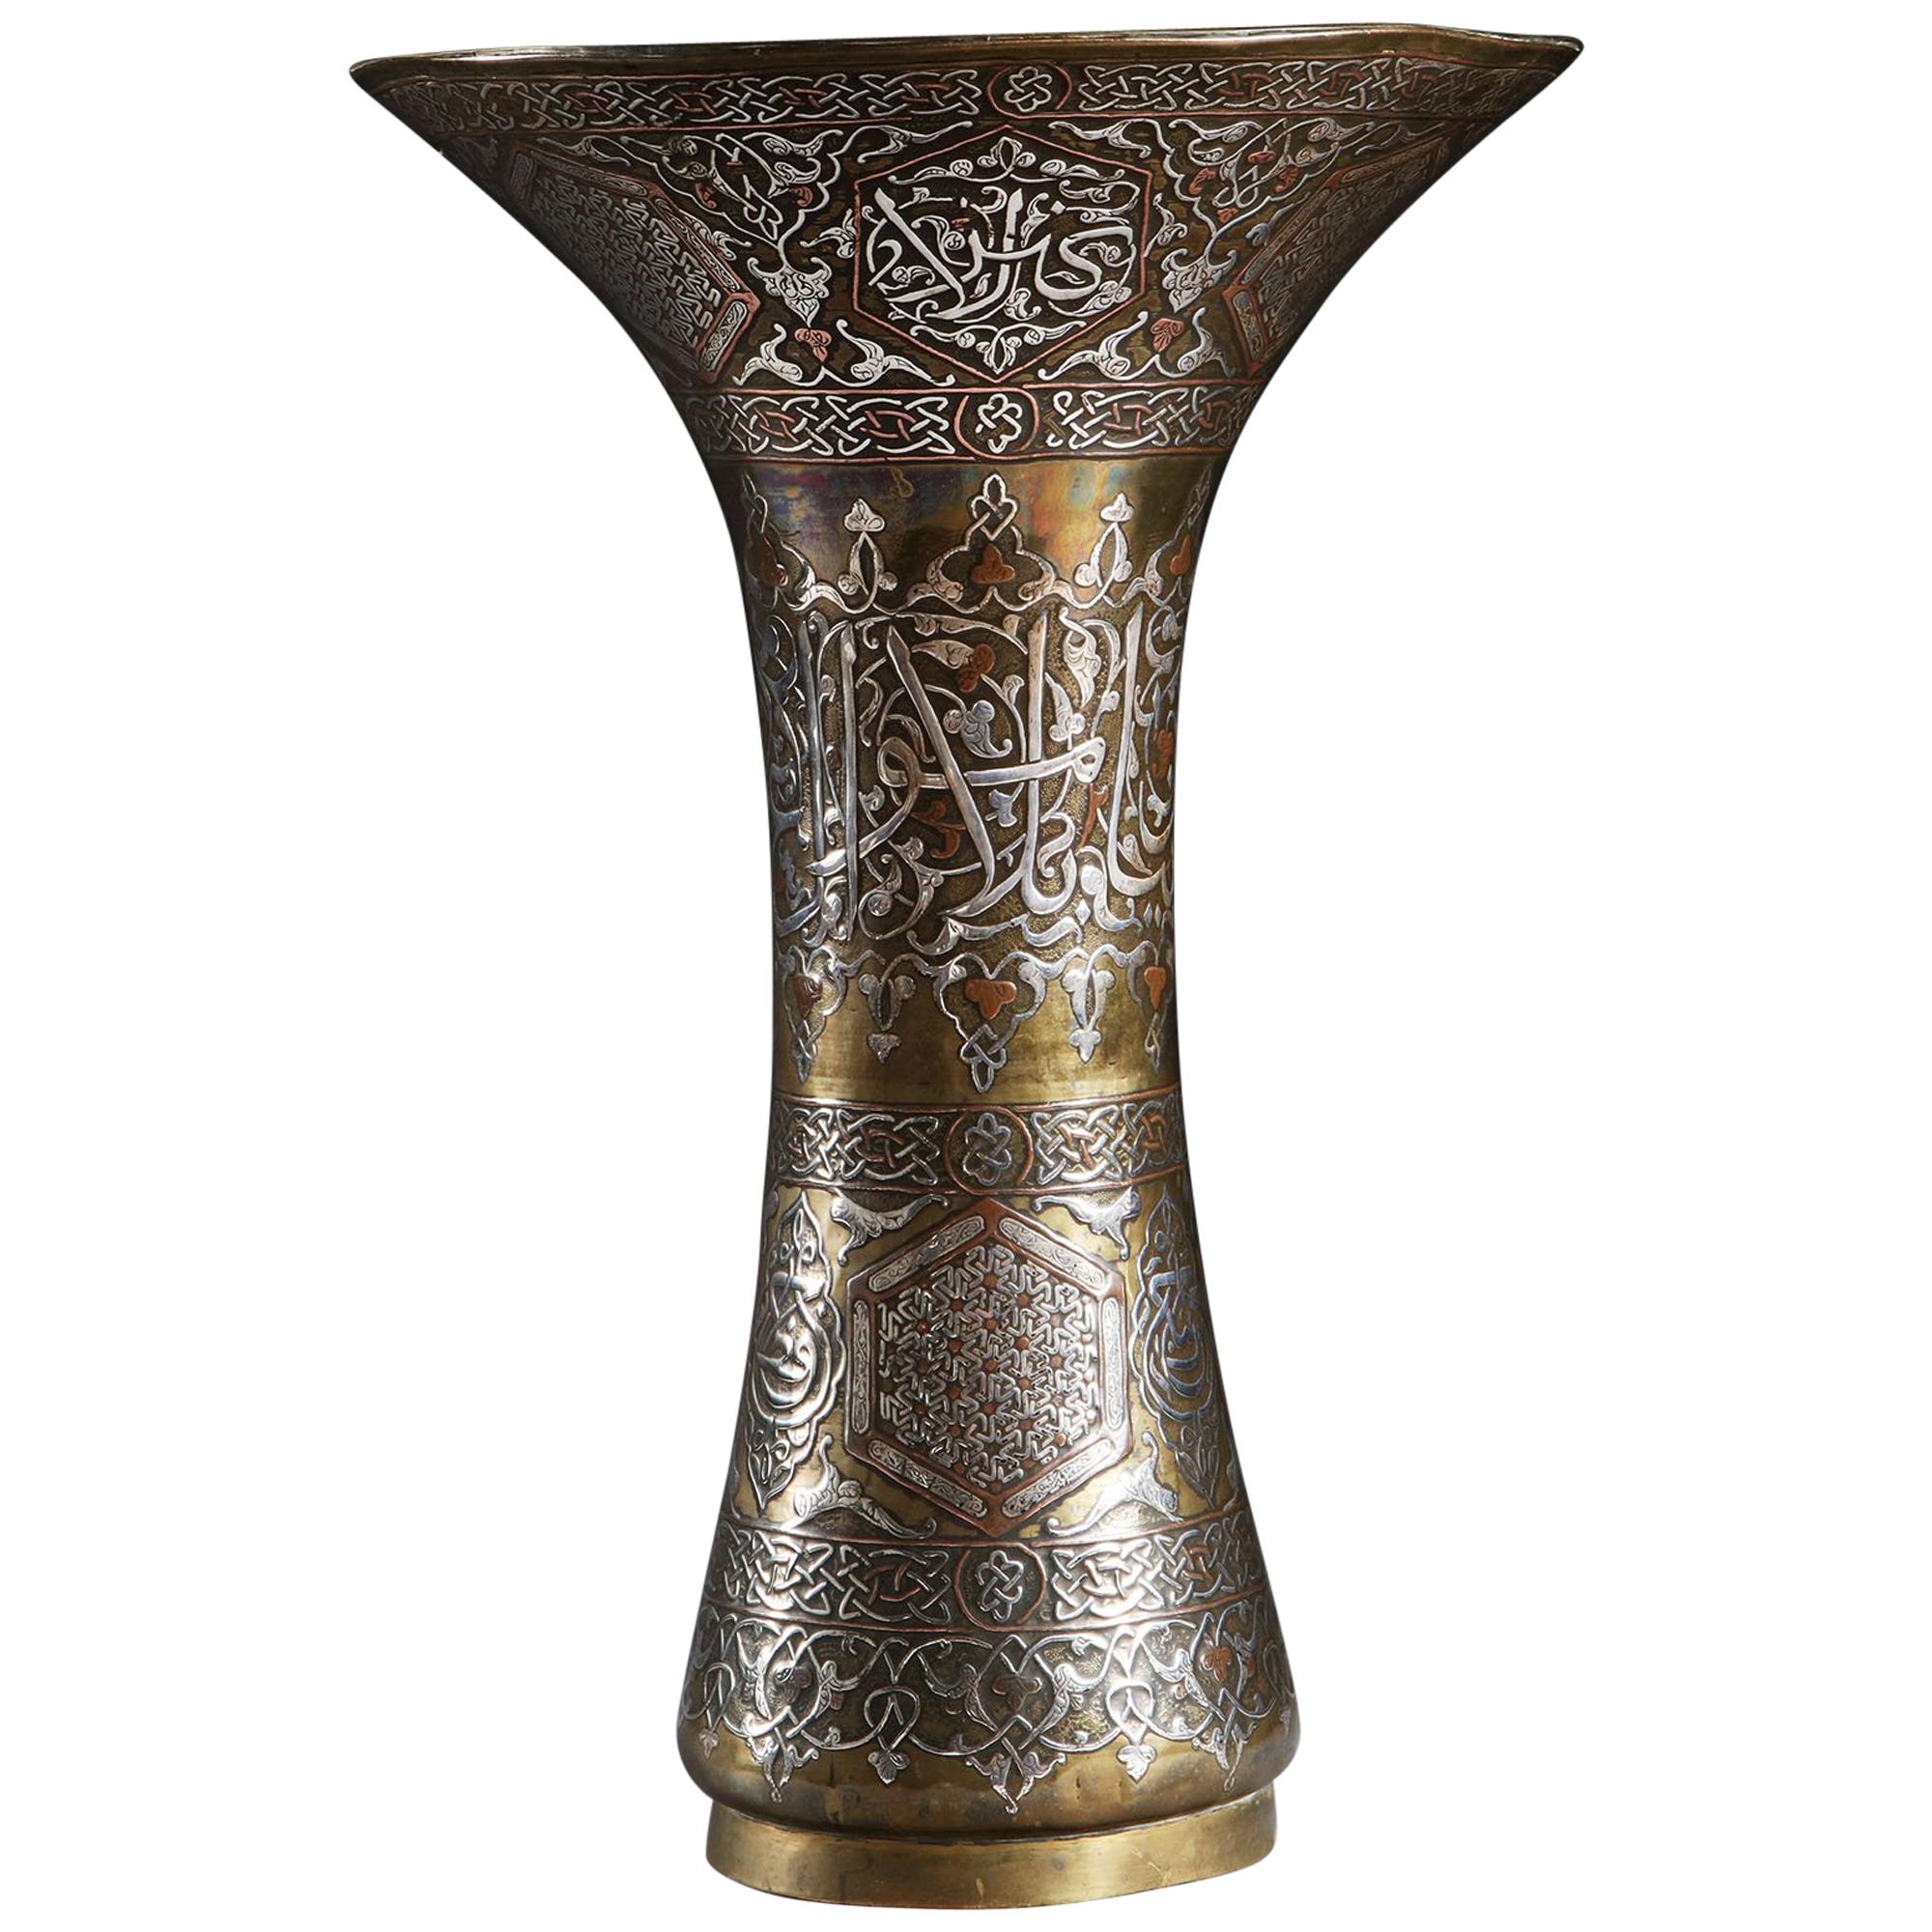 Mid-19th Century Ottoman Trumpet Vase in Silver, Copper and Brass